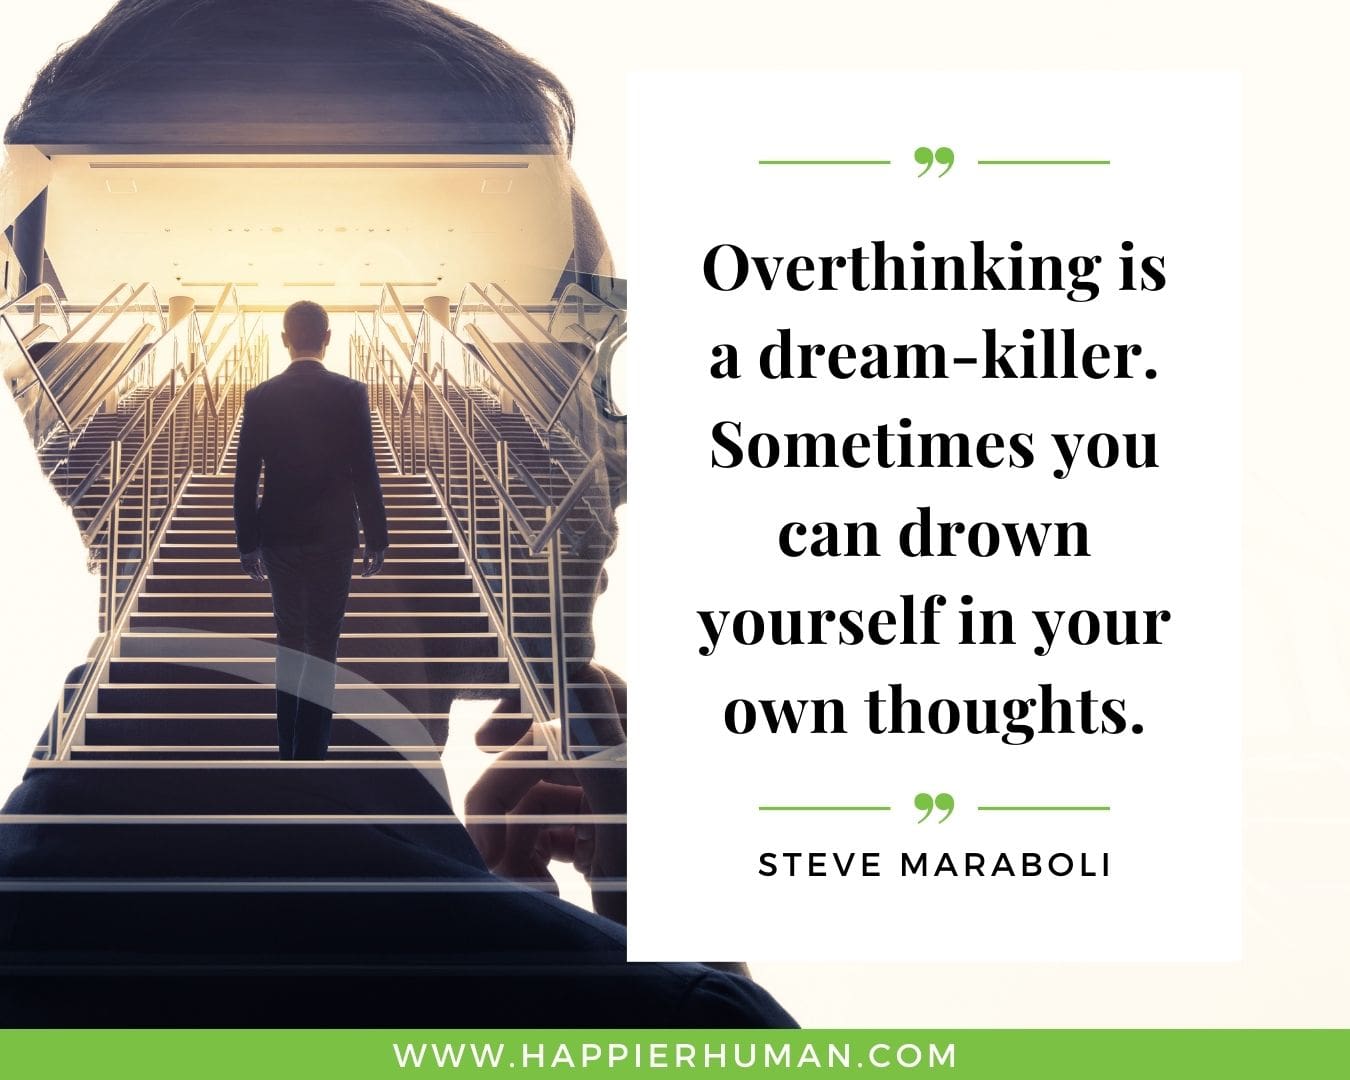 Overthinking Quotes - “Overthinking is a dream-killer. Sometimes you can drown yourself in your own thoughts.” - Steve Maraboli